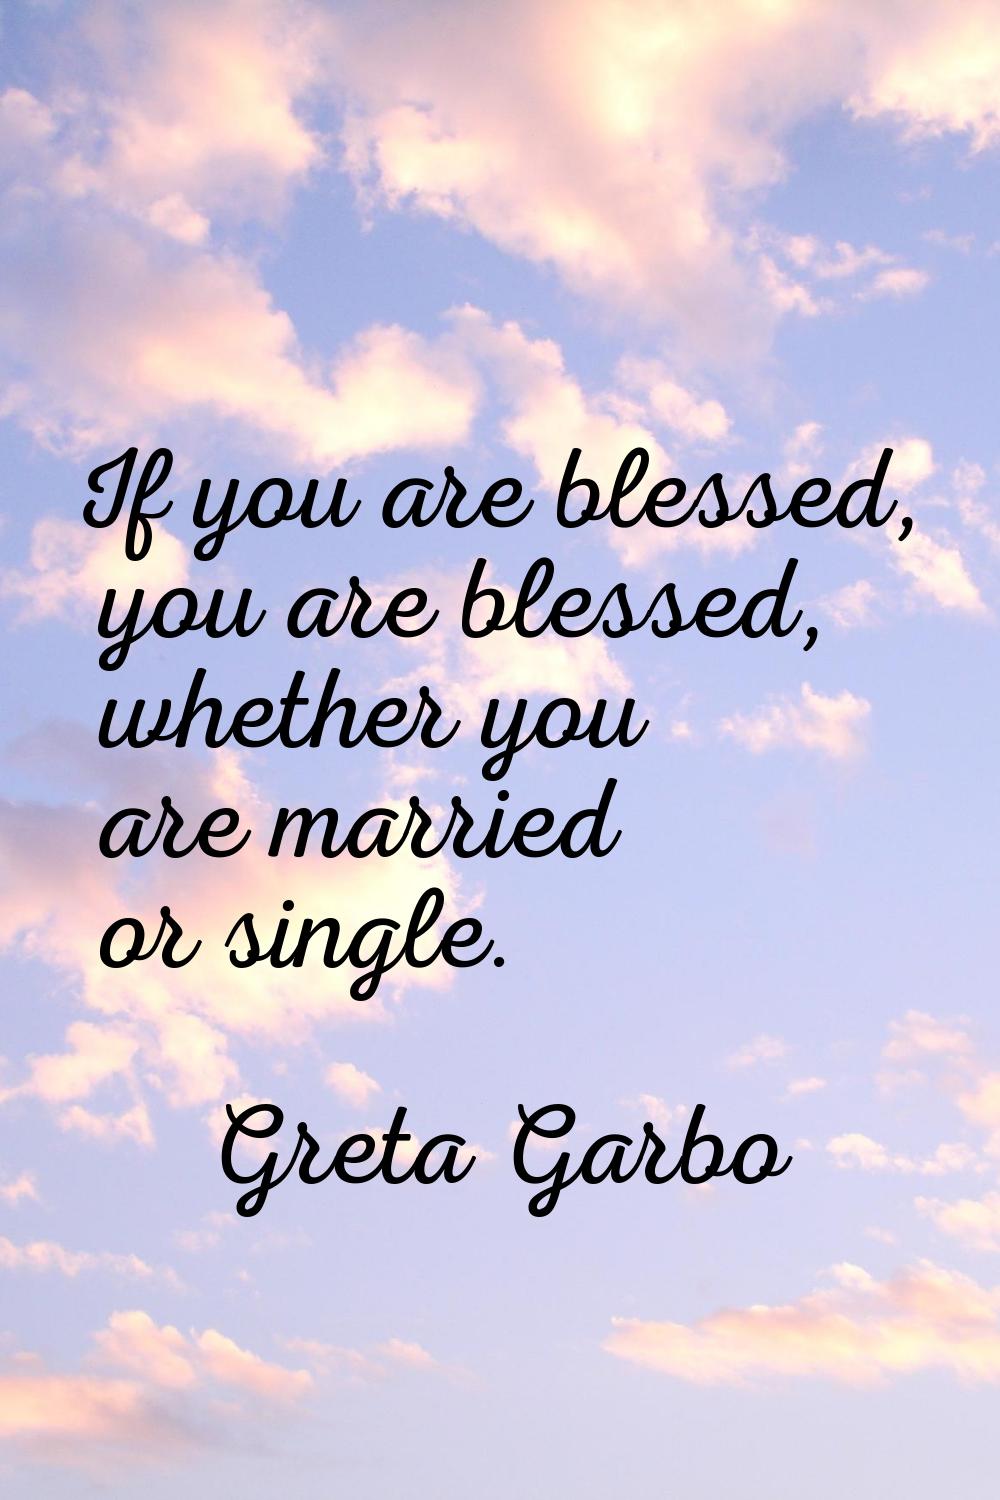 If you are blessed, you are blessed, whether you are married or single.